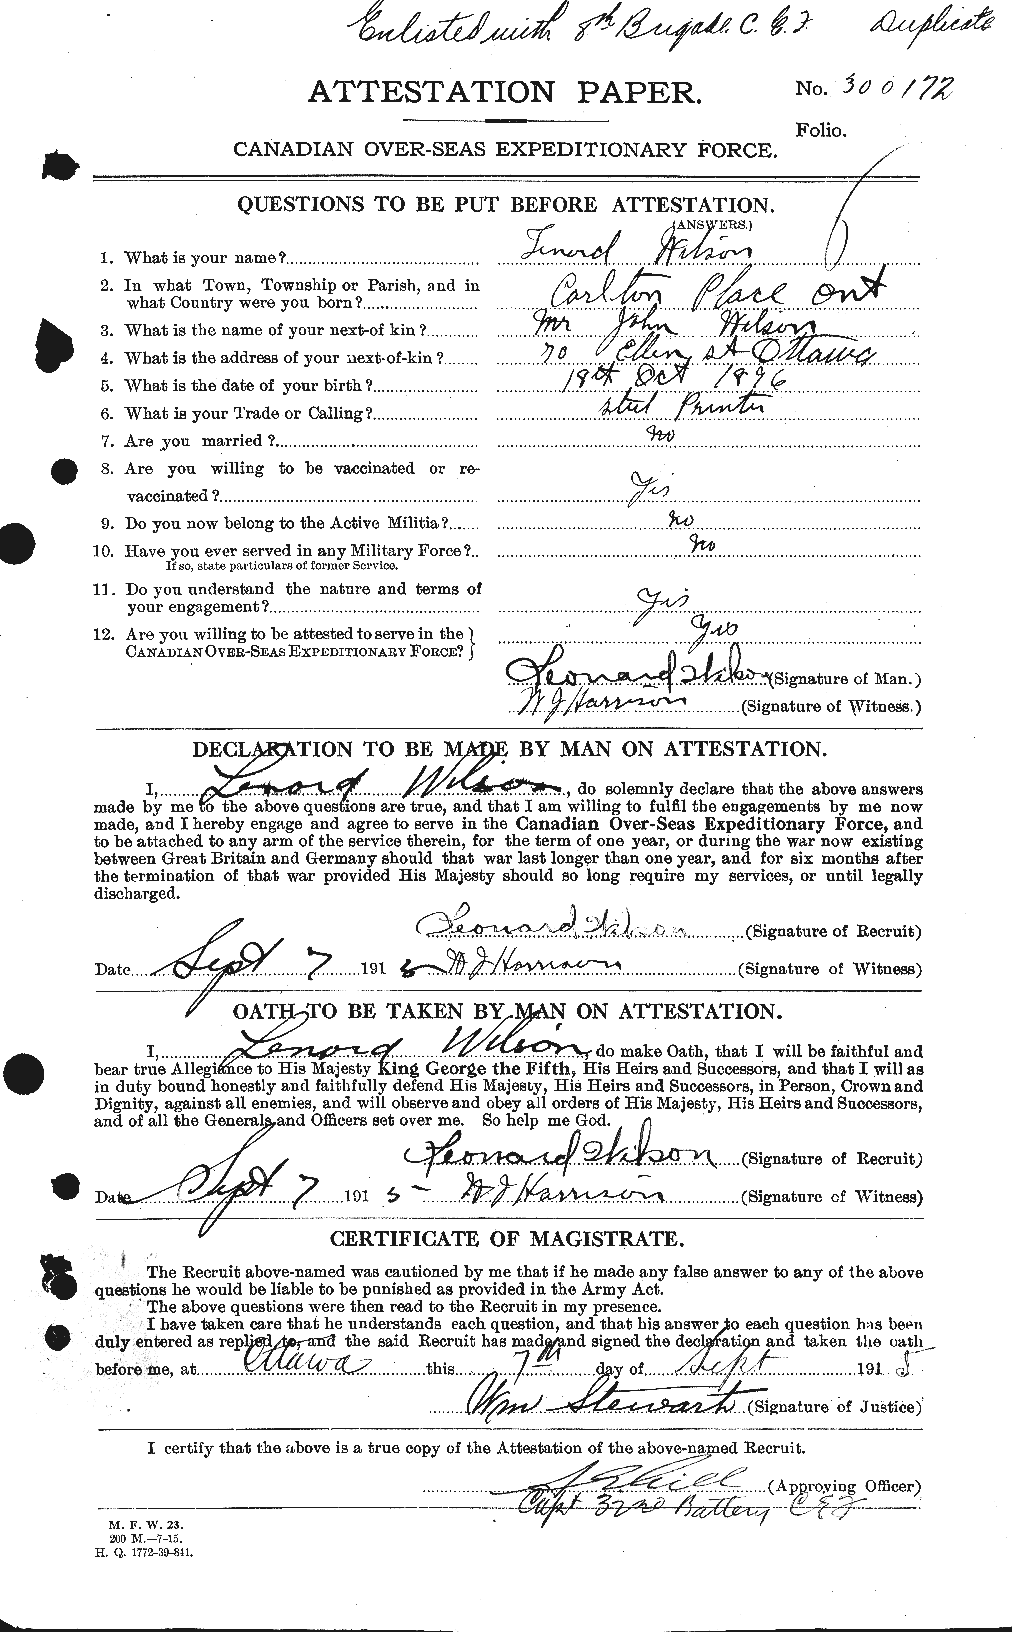 Personnel Records of the First World War - CEF 678634a